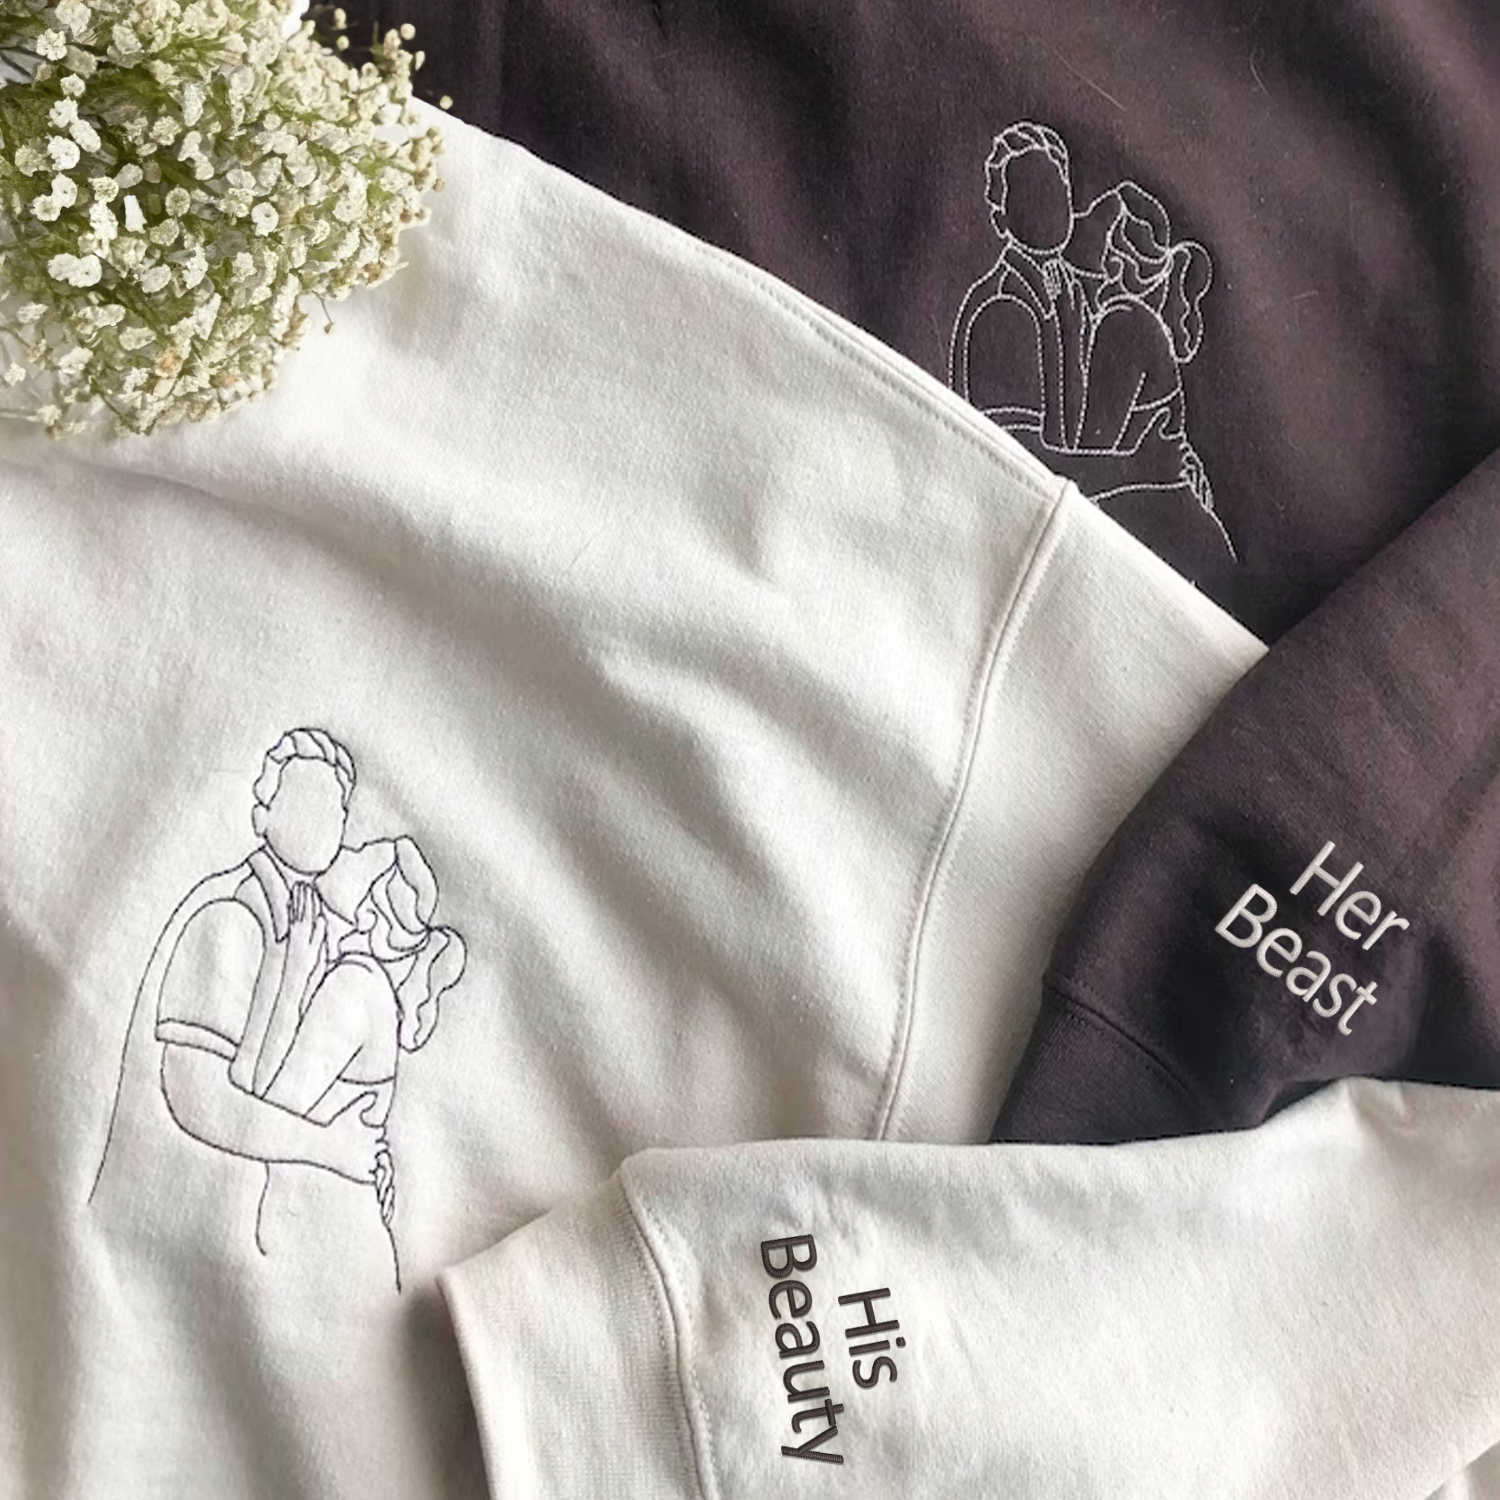 Embroidered Beauty and The Beast Custom Hoodies or Sweatshirts from Your Photo